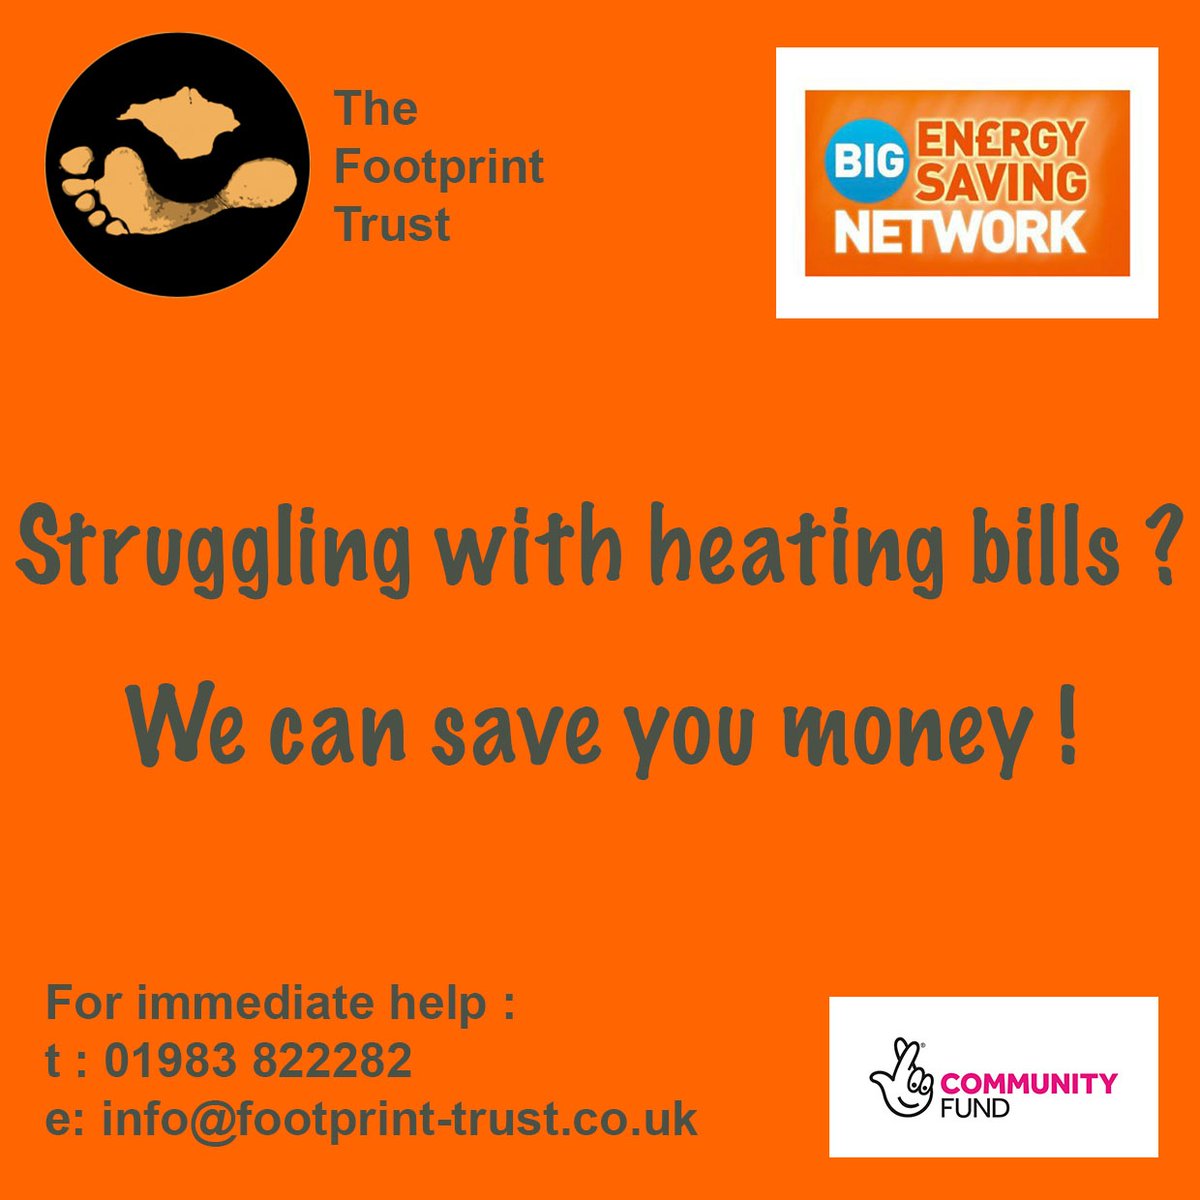 This week we will be at :

Ryde Job Centre Tuesday morning 10:00 - 11:30

We can help you reduce your energy bills and save money !

#fuelpoverty #heatingoreating #isleofwight #islandlife #broke #heating #moneysaving #energysaving